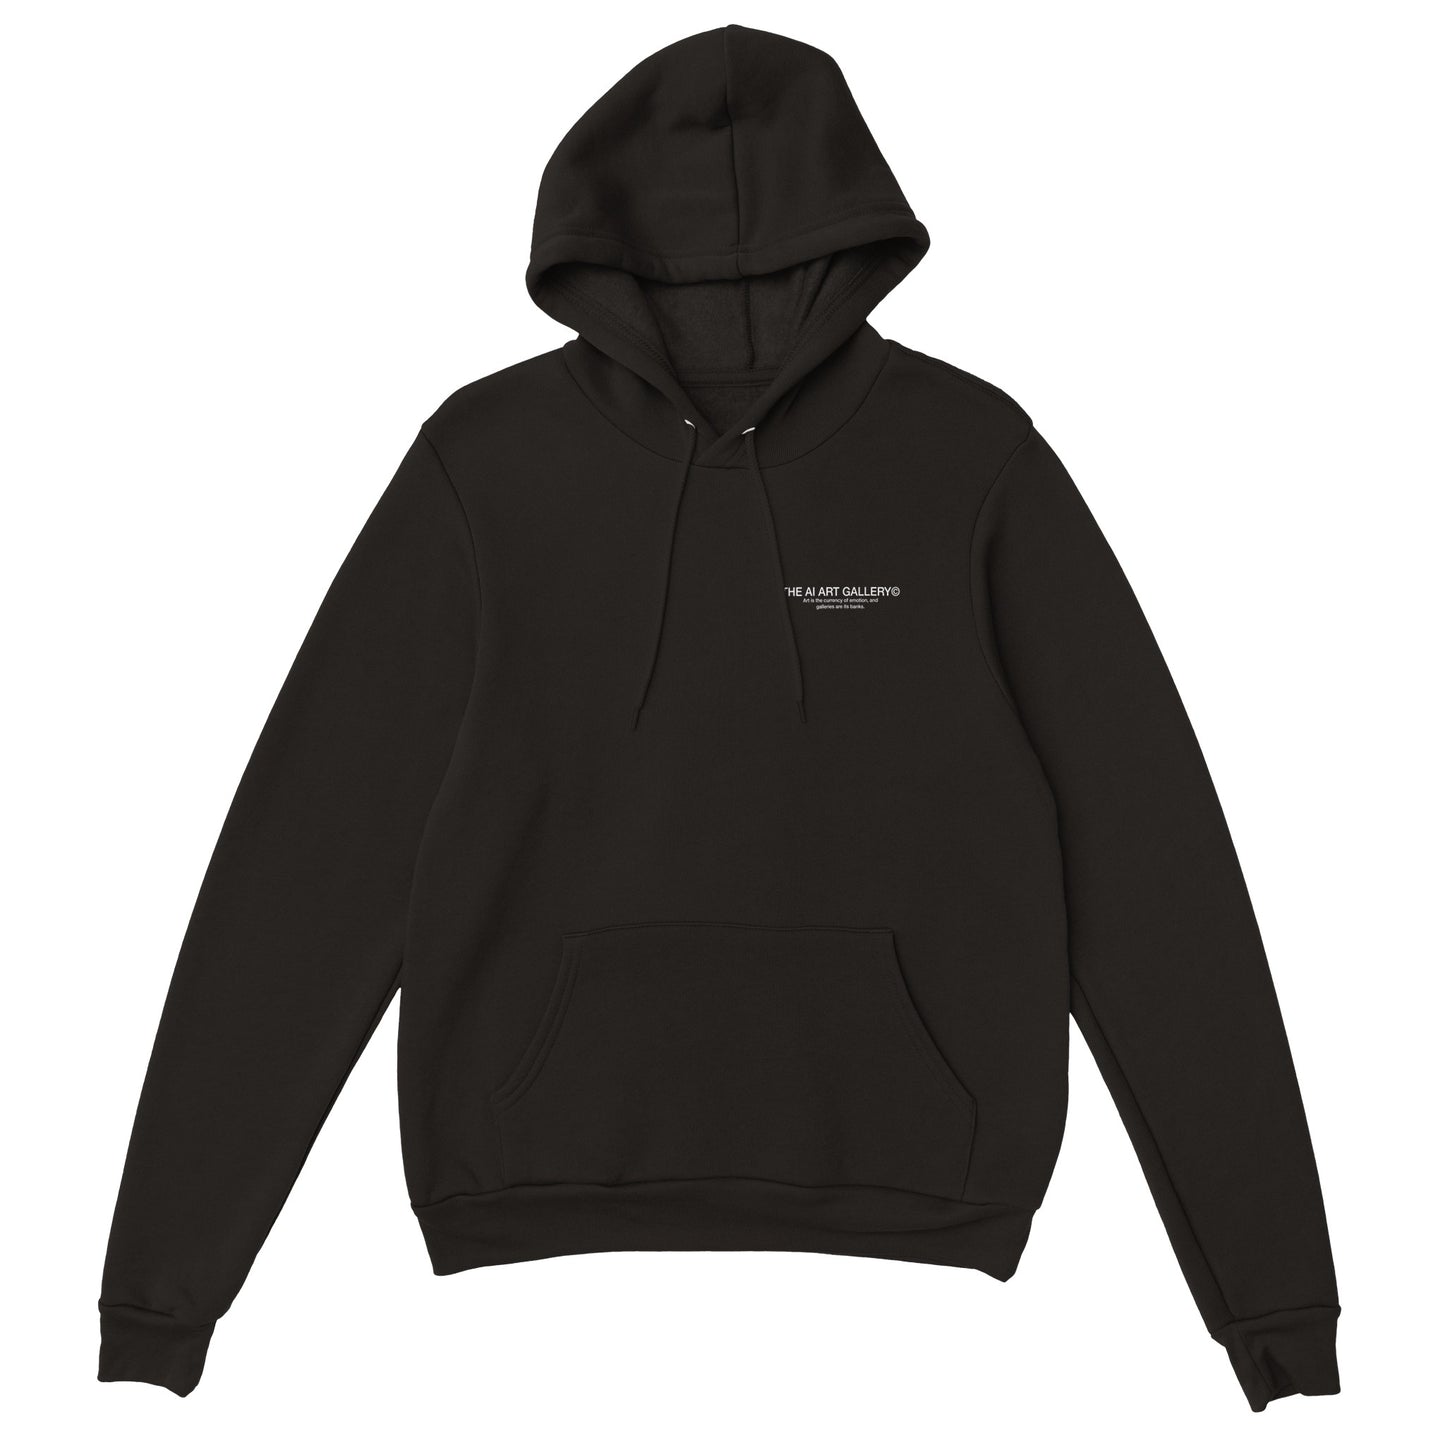 NEED MONEY FOR A PICASSO / Hoodie / Black